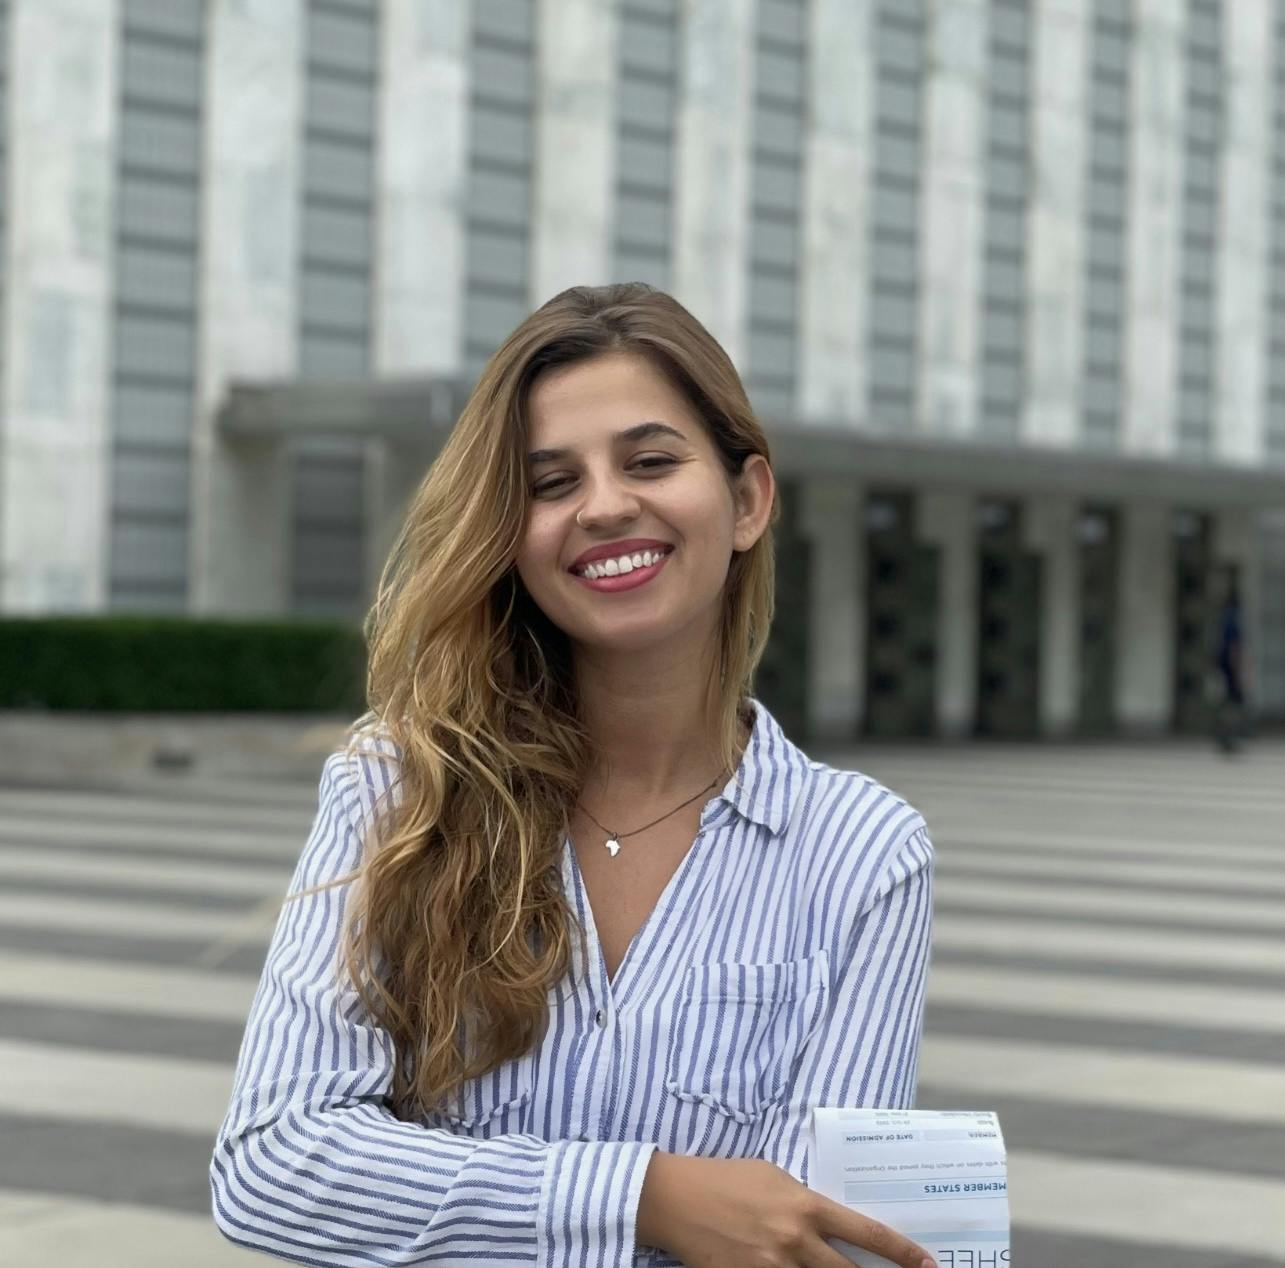 Flávia smiles in front of a large building. She is wearing a blue and white striped shirt.